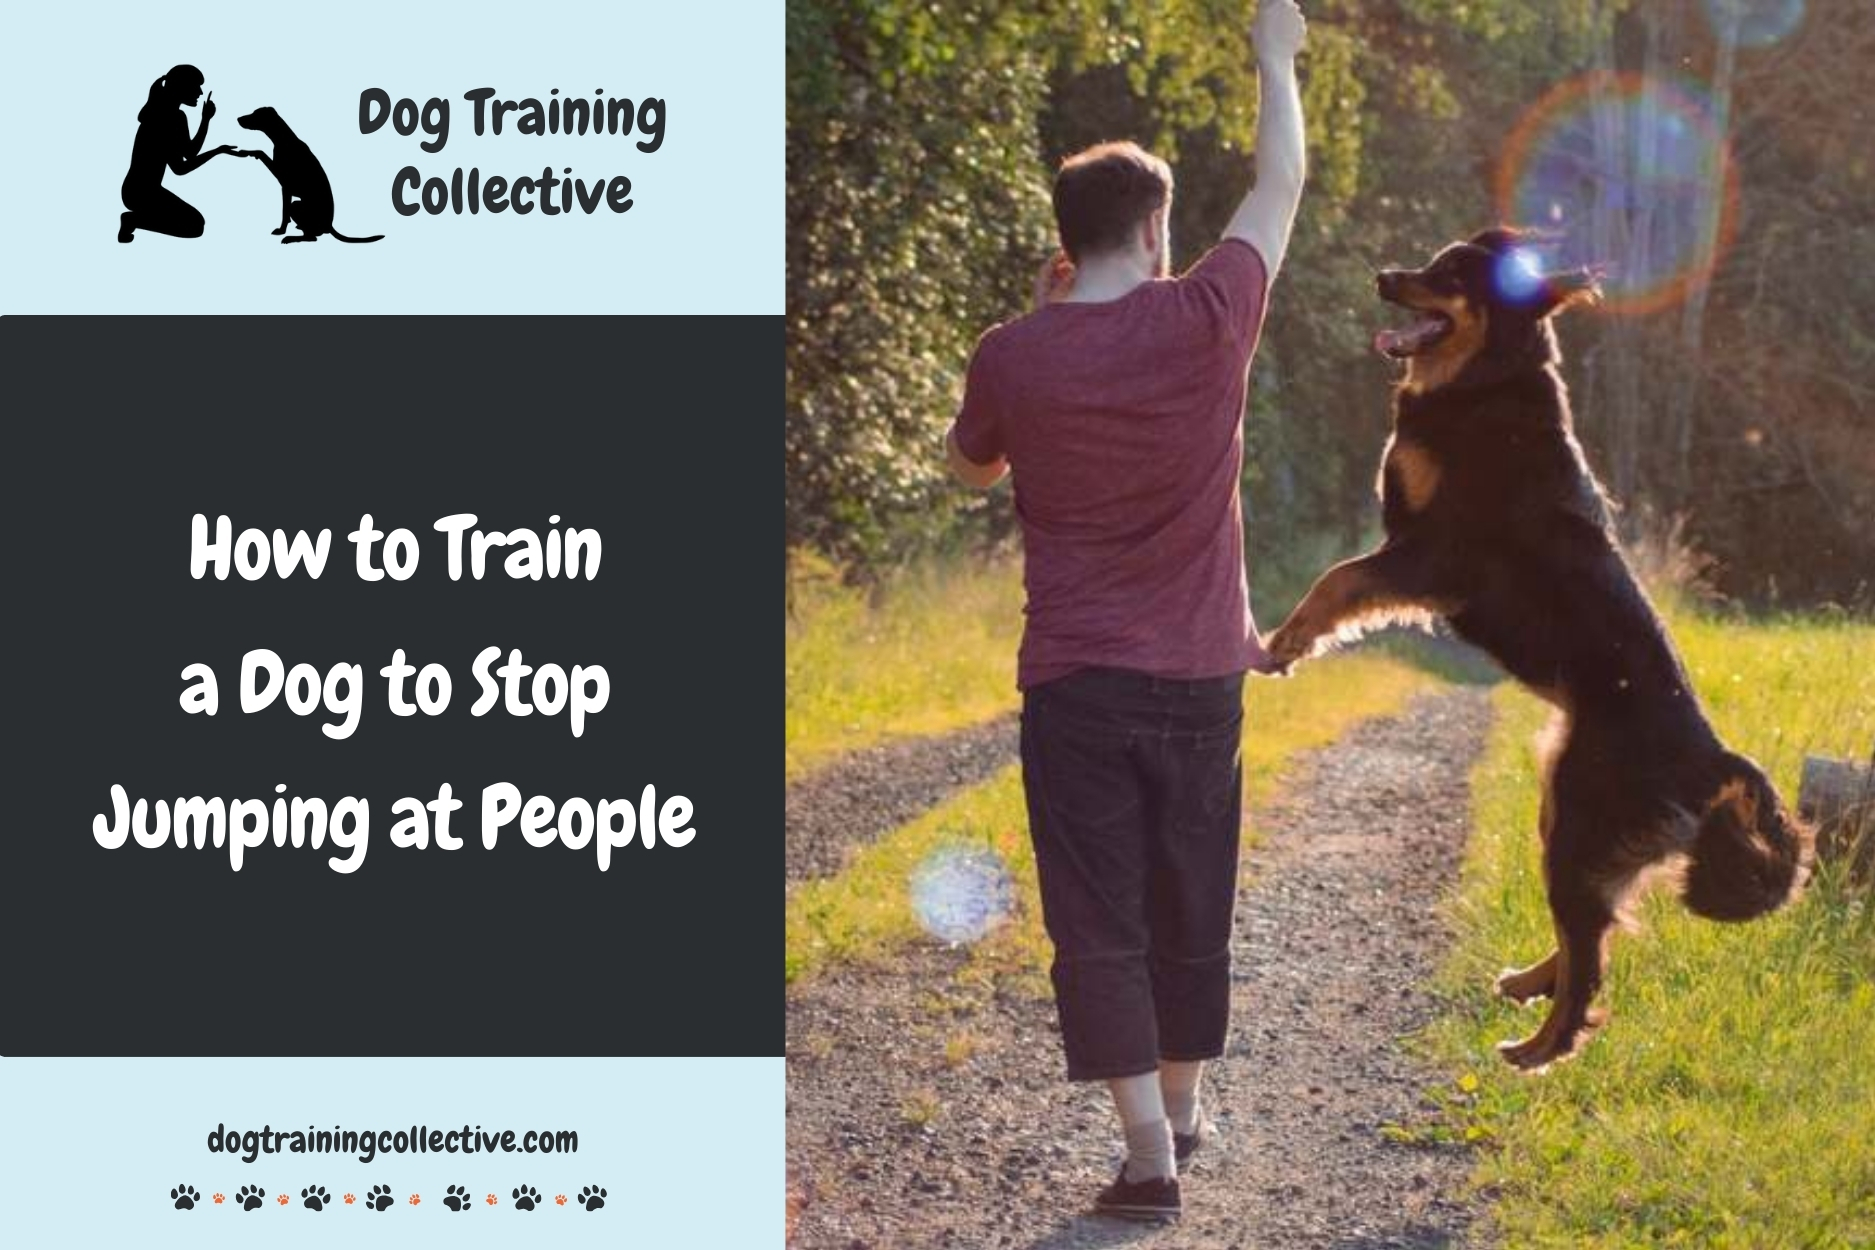 How to Train a Dog to Stop Jumping at People